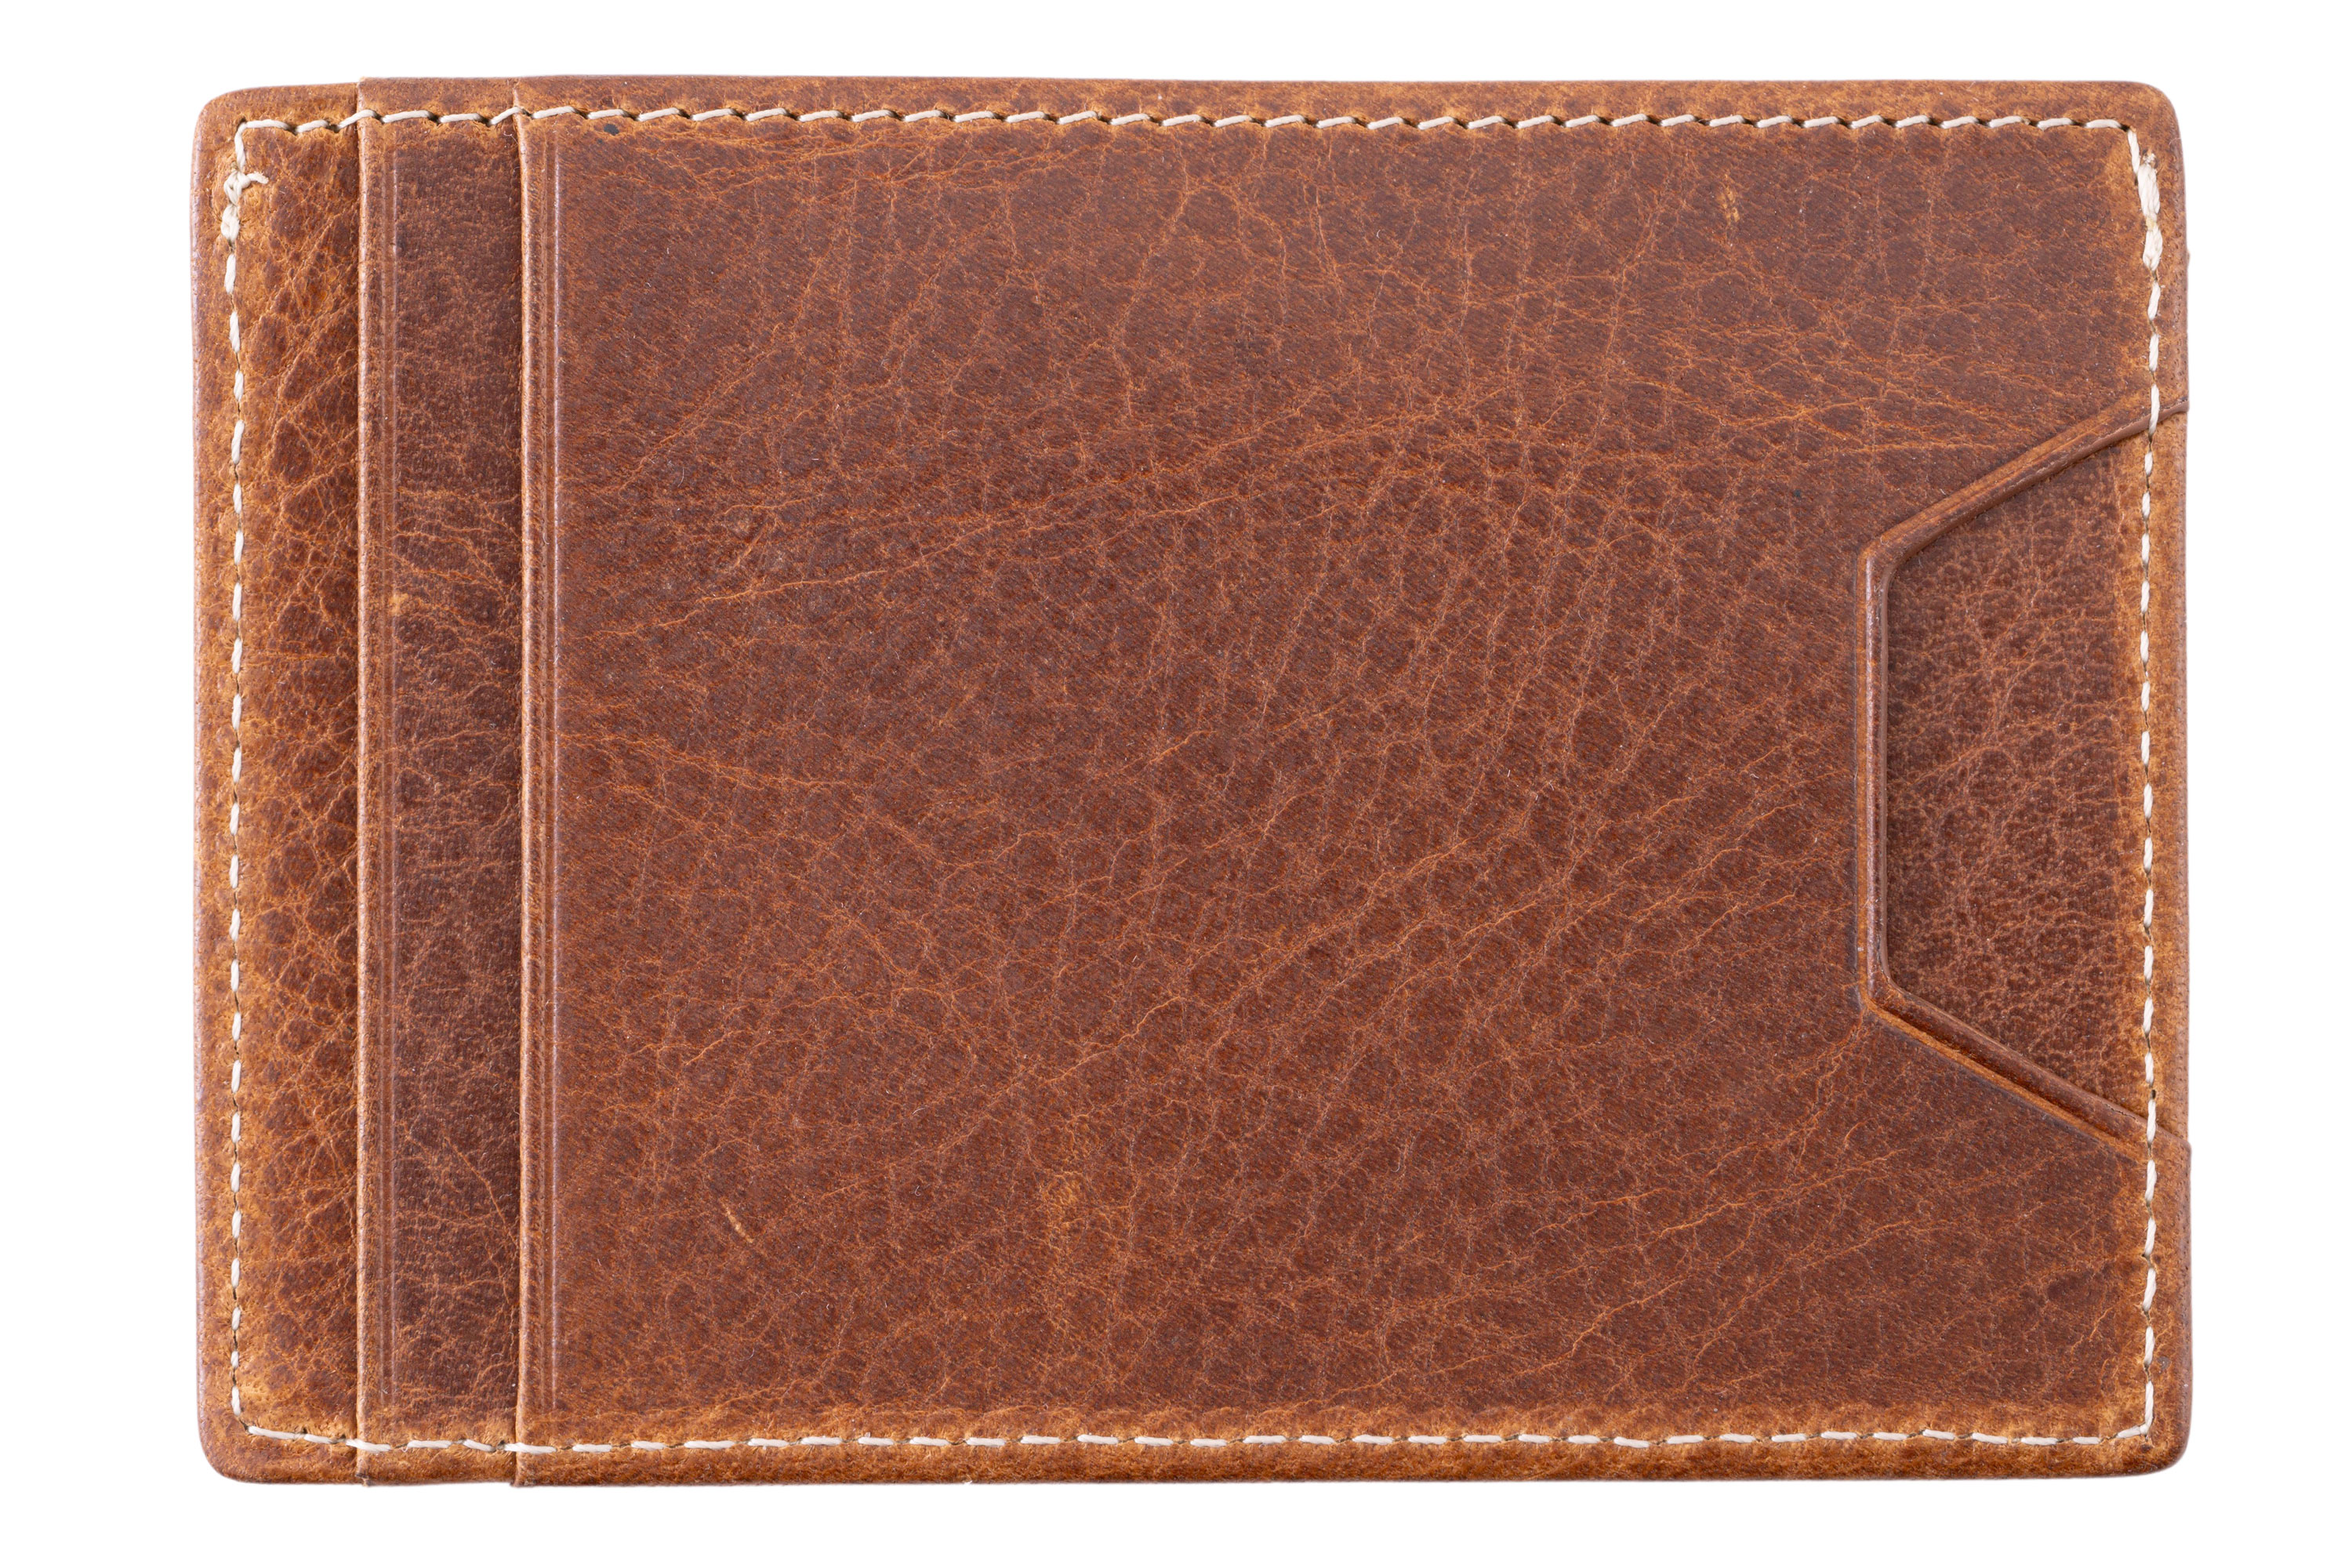 Slim Wallet - 4CC - Dumont Saddle Brown Full-Grain Leather back view.